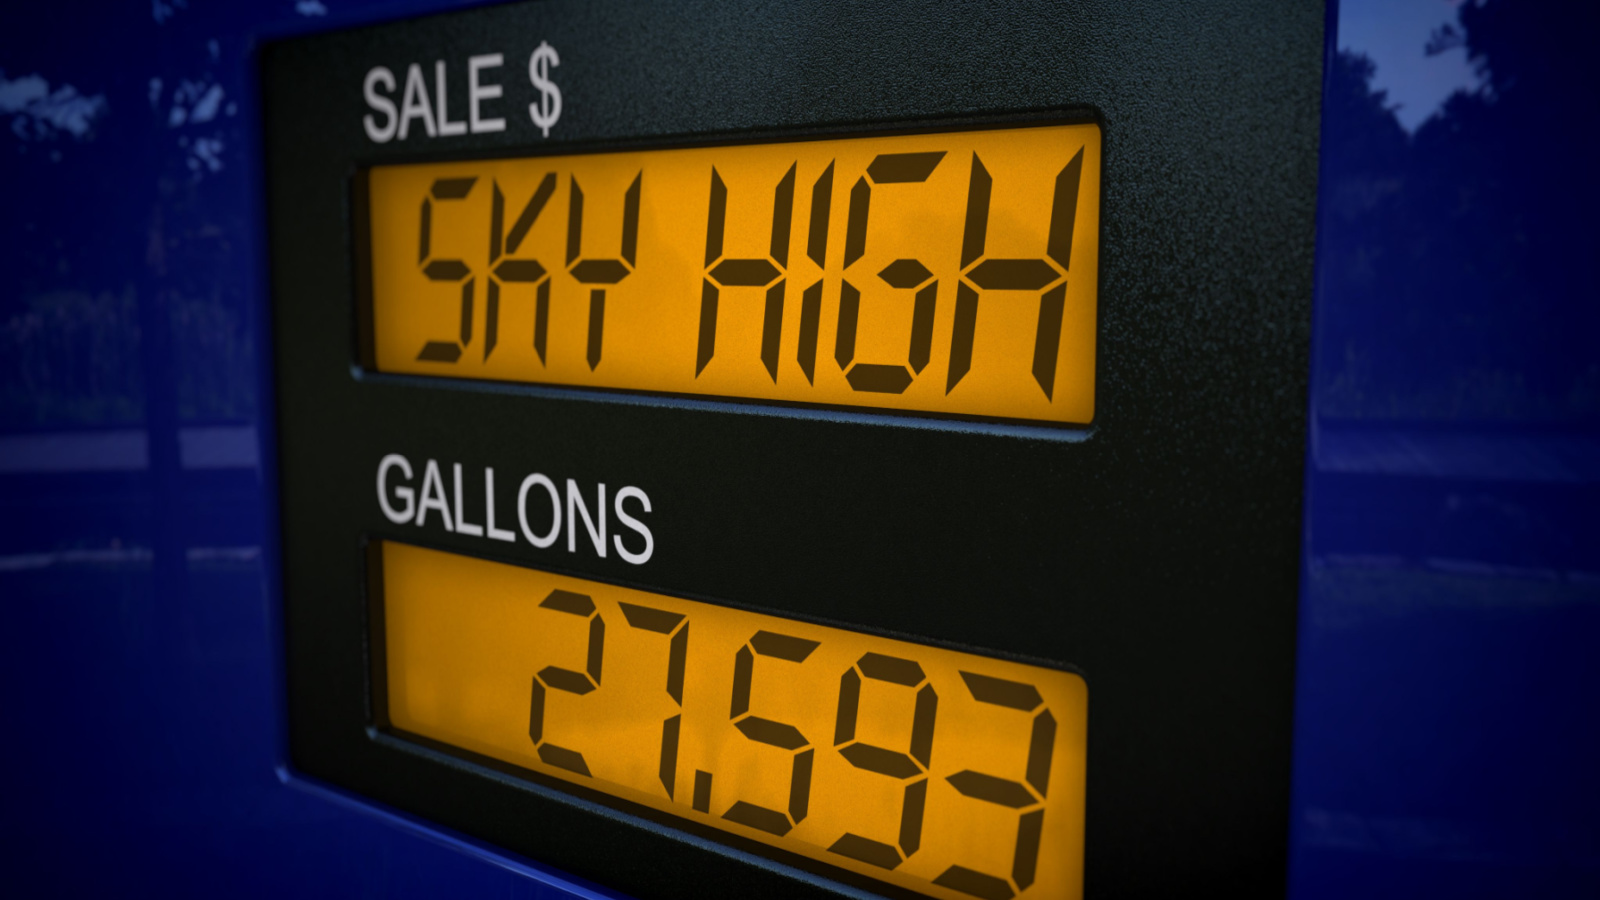 A fuel pump showing "sky high" gas prices representing Gas Price Predictions.